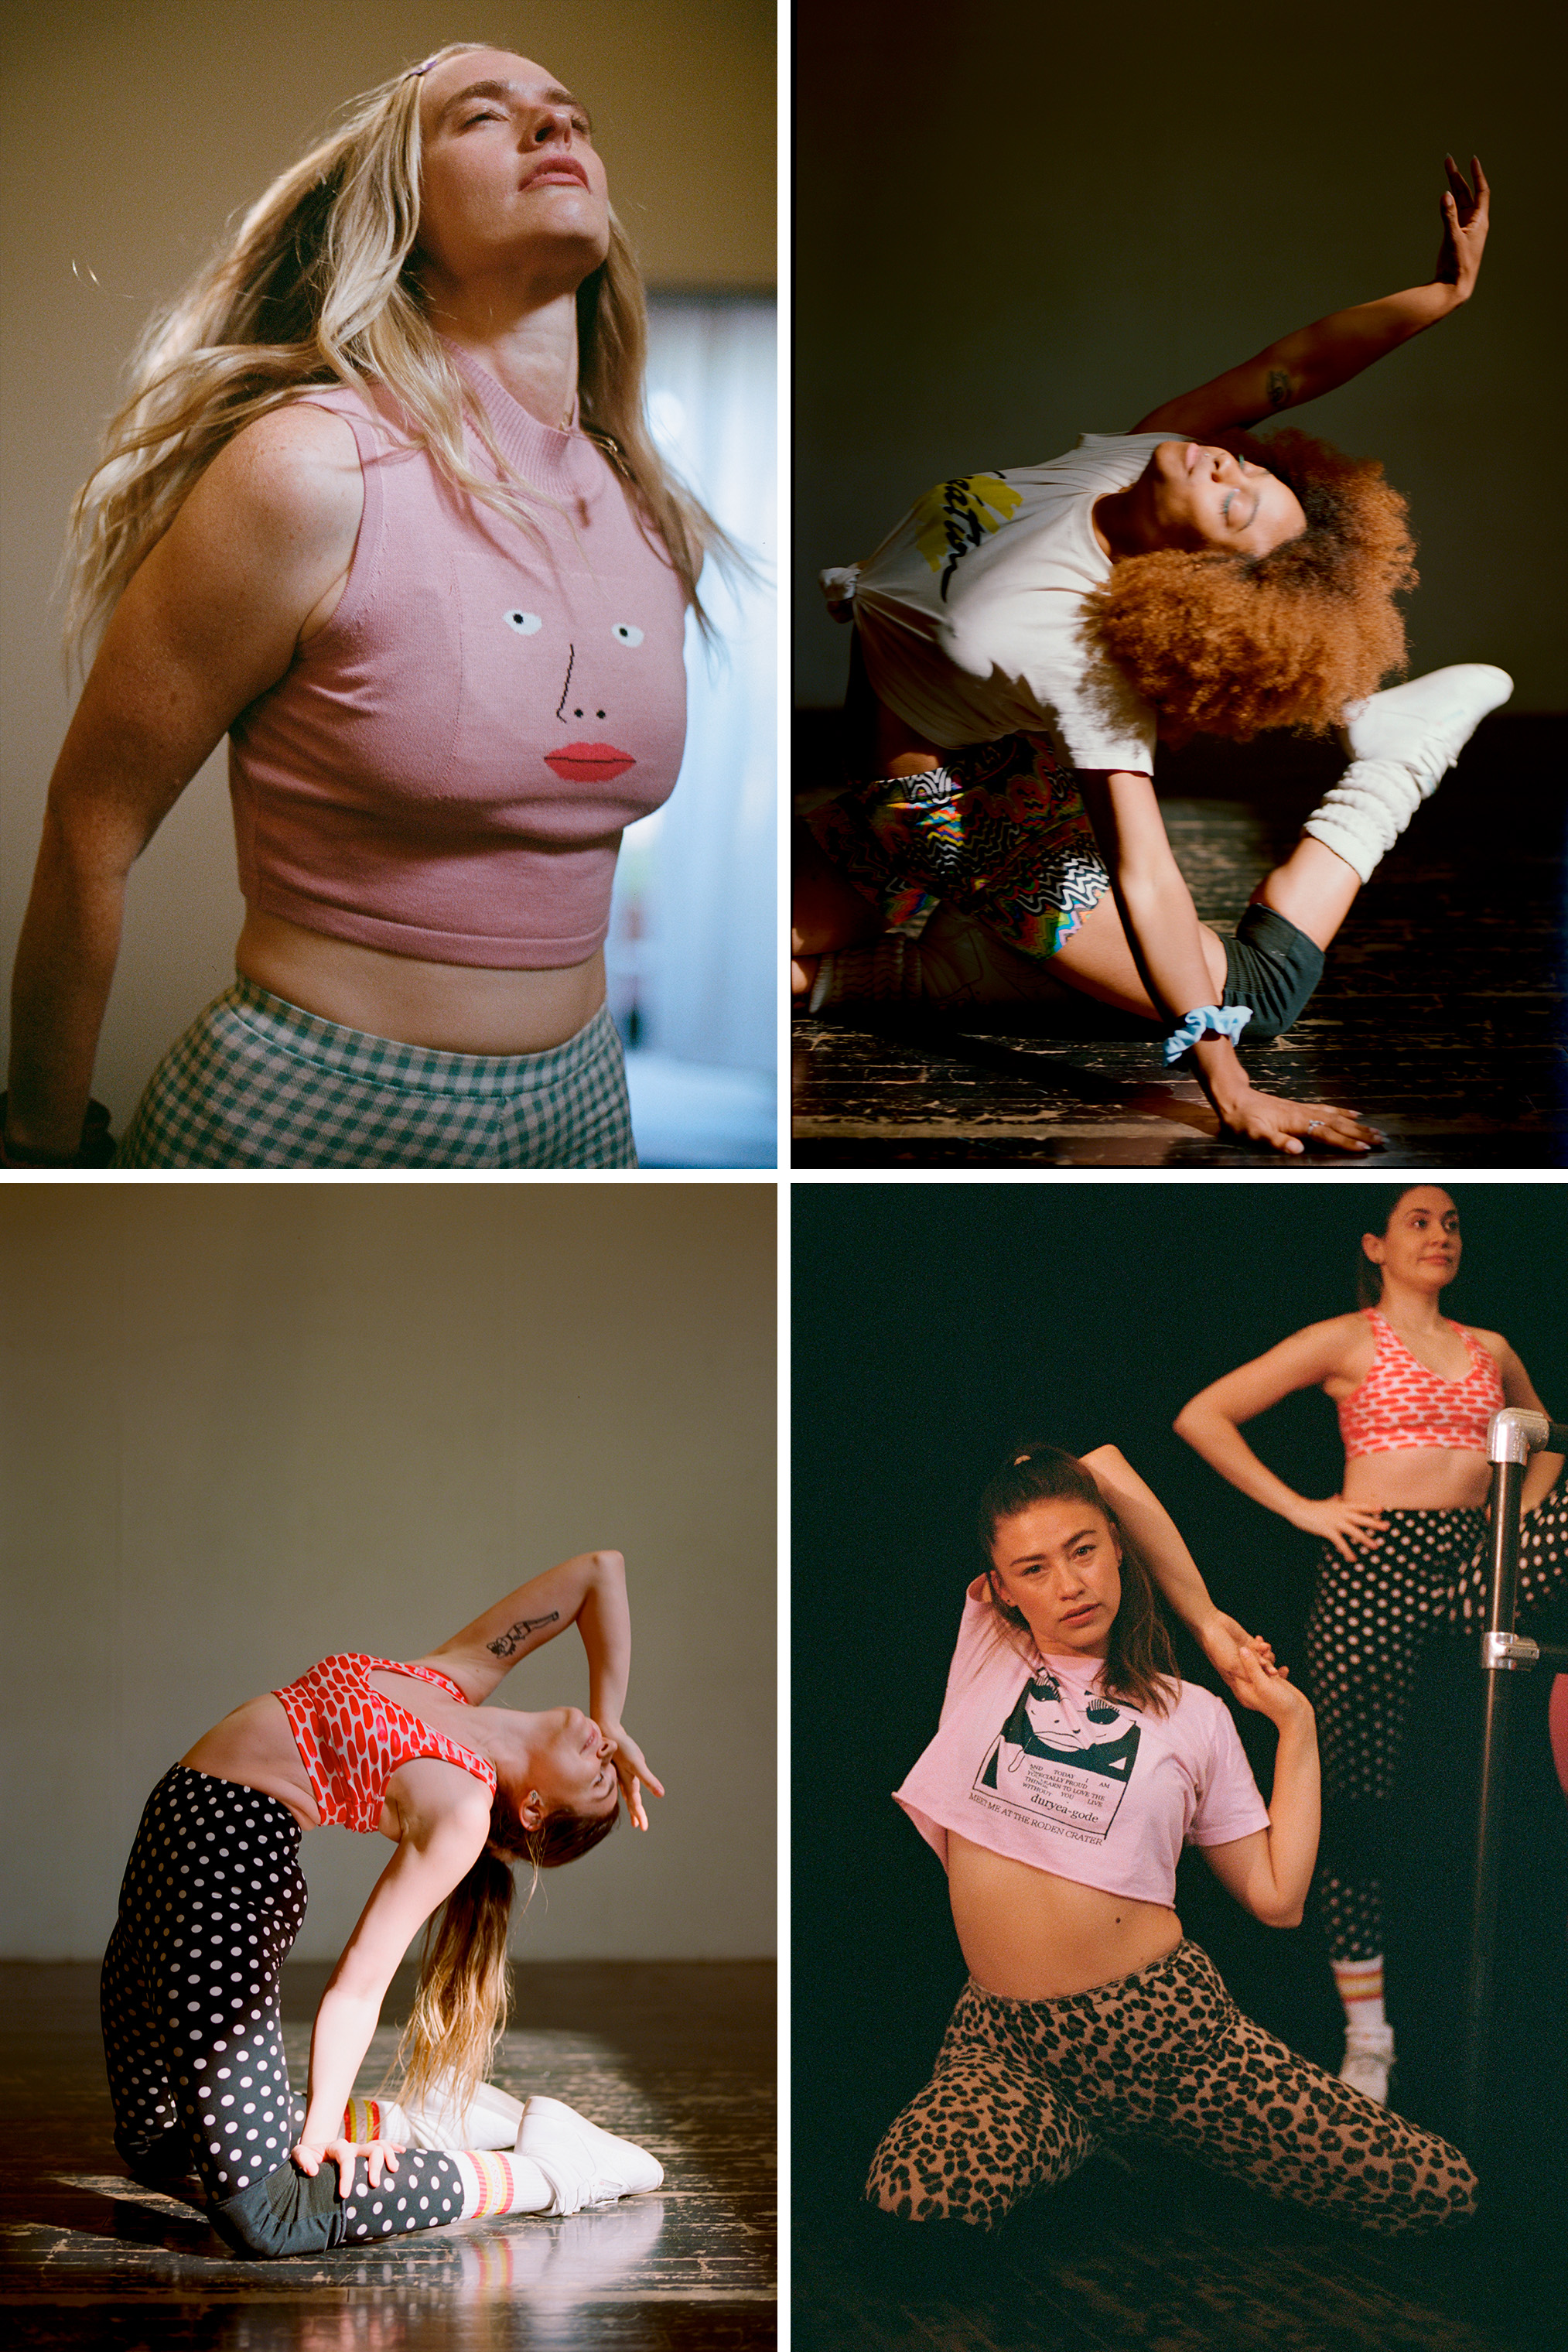 Squad members (clockwise from top left) Kate Hollowell, Kyla Carter, Bonnie Hernandez and Penelope Gazin pose during rehearsal. (Bella Newman for TIME)